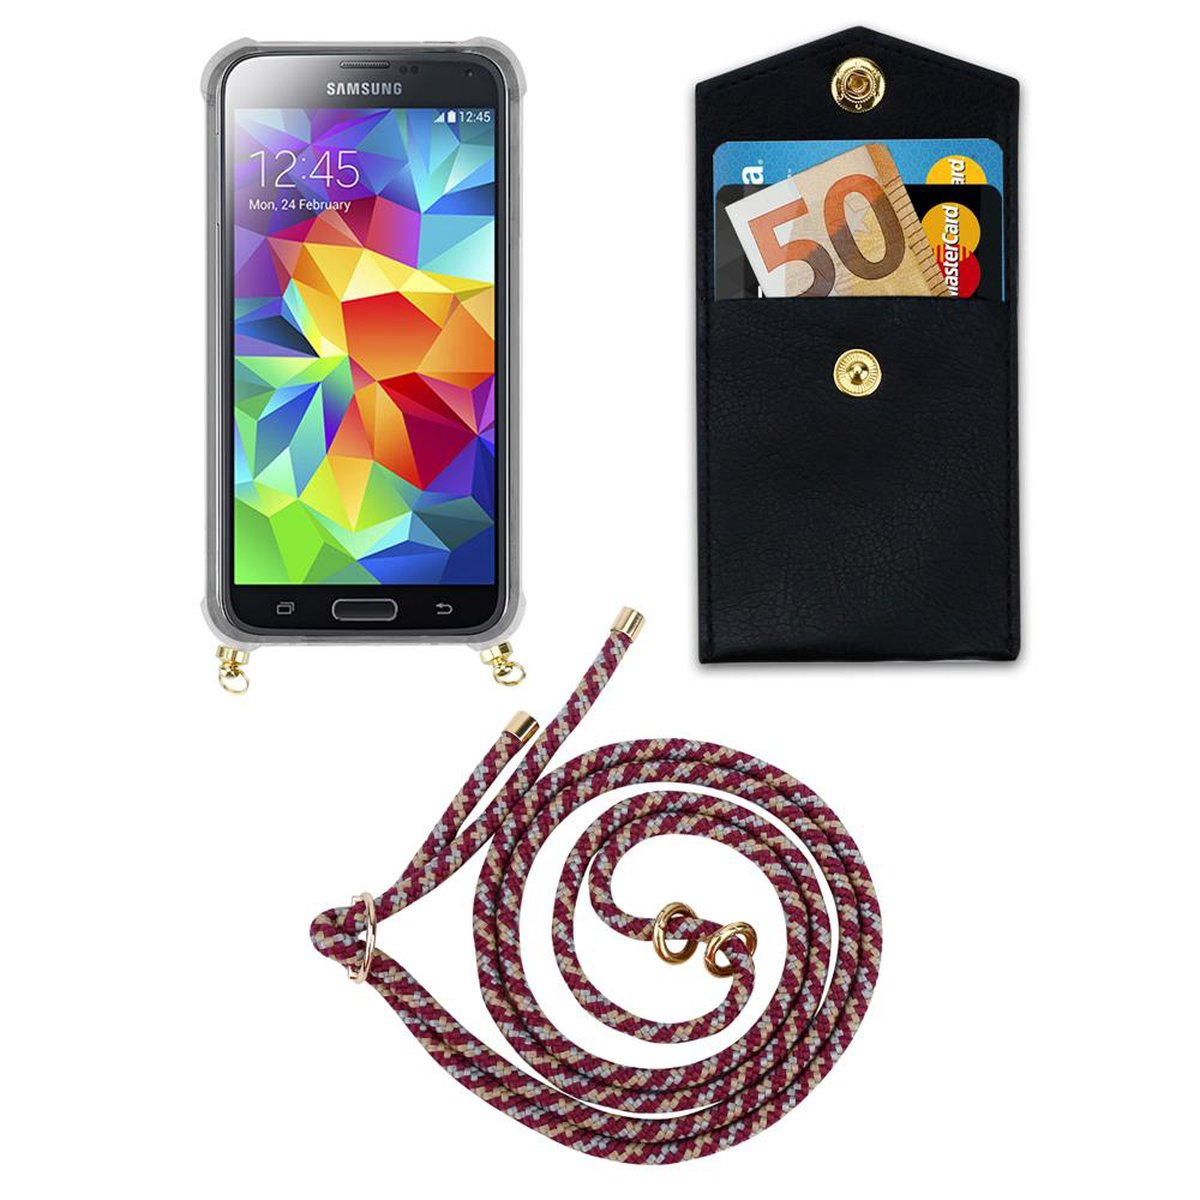 WEIß Band Handy / Ringen, NEO, und abnehmbarer Gold Backcover, Kordel Hülle, GELB S5 Samsung, ROT S5 CADORABO Galaxy Kette mit